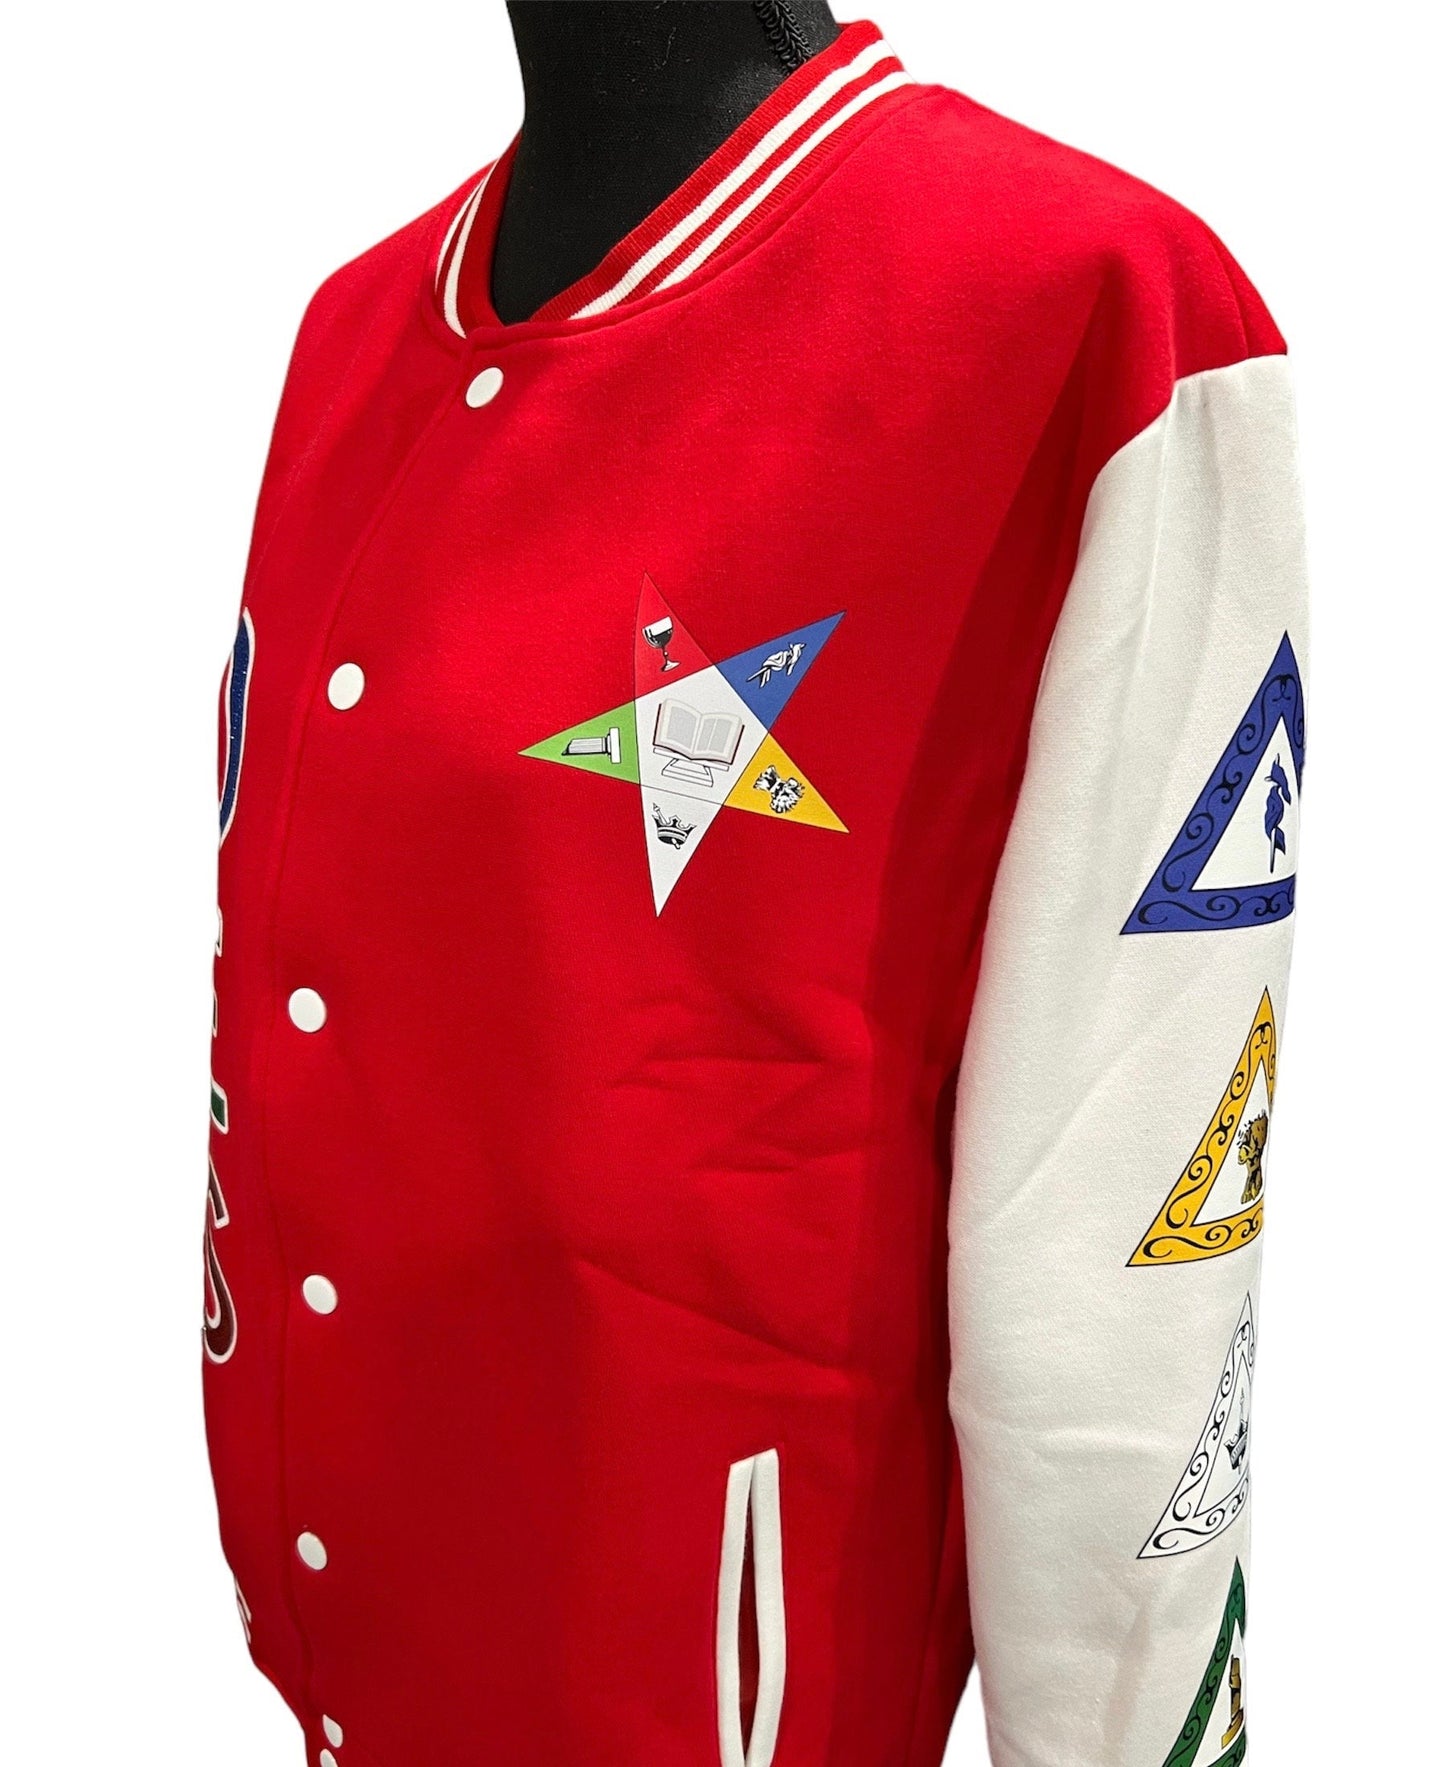 Personalized Oes order of Eastern Star Letterman varsity Jacket Bling design can be customized